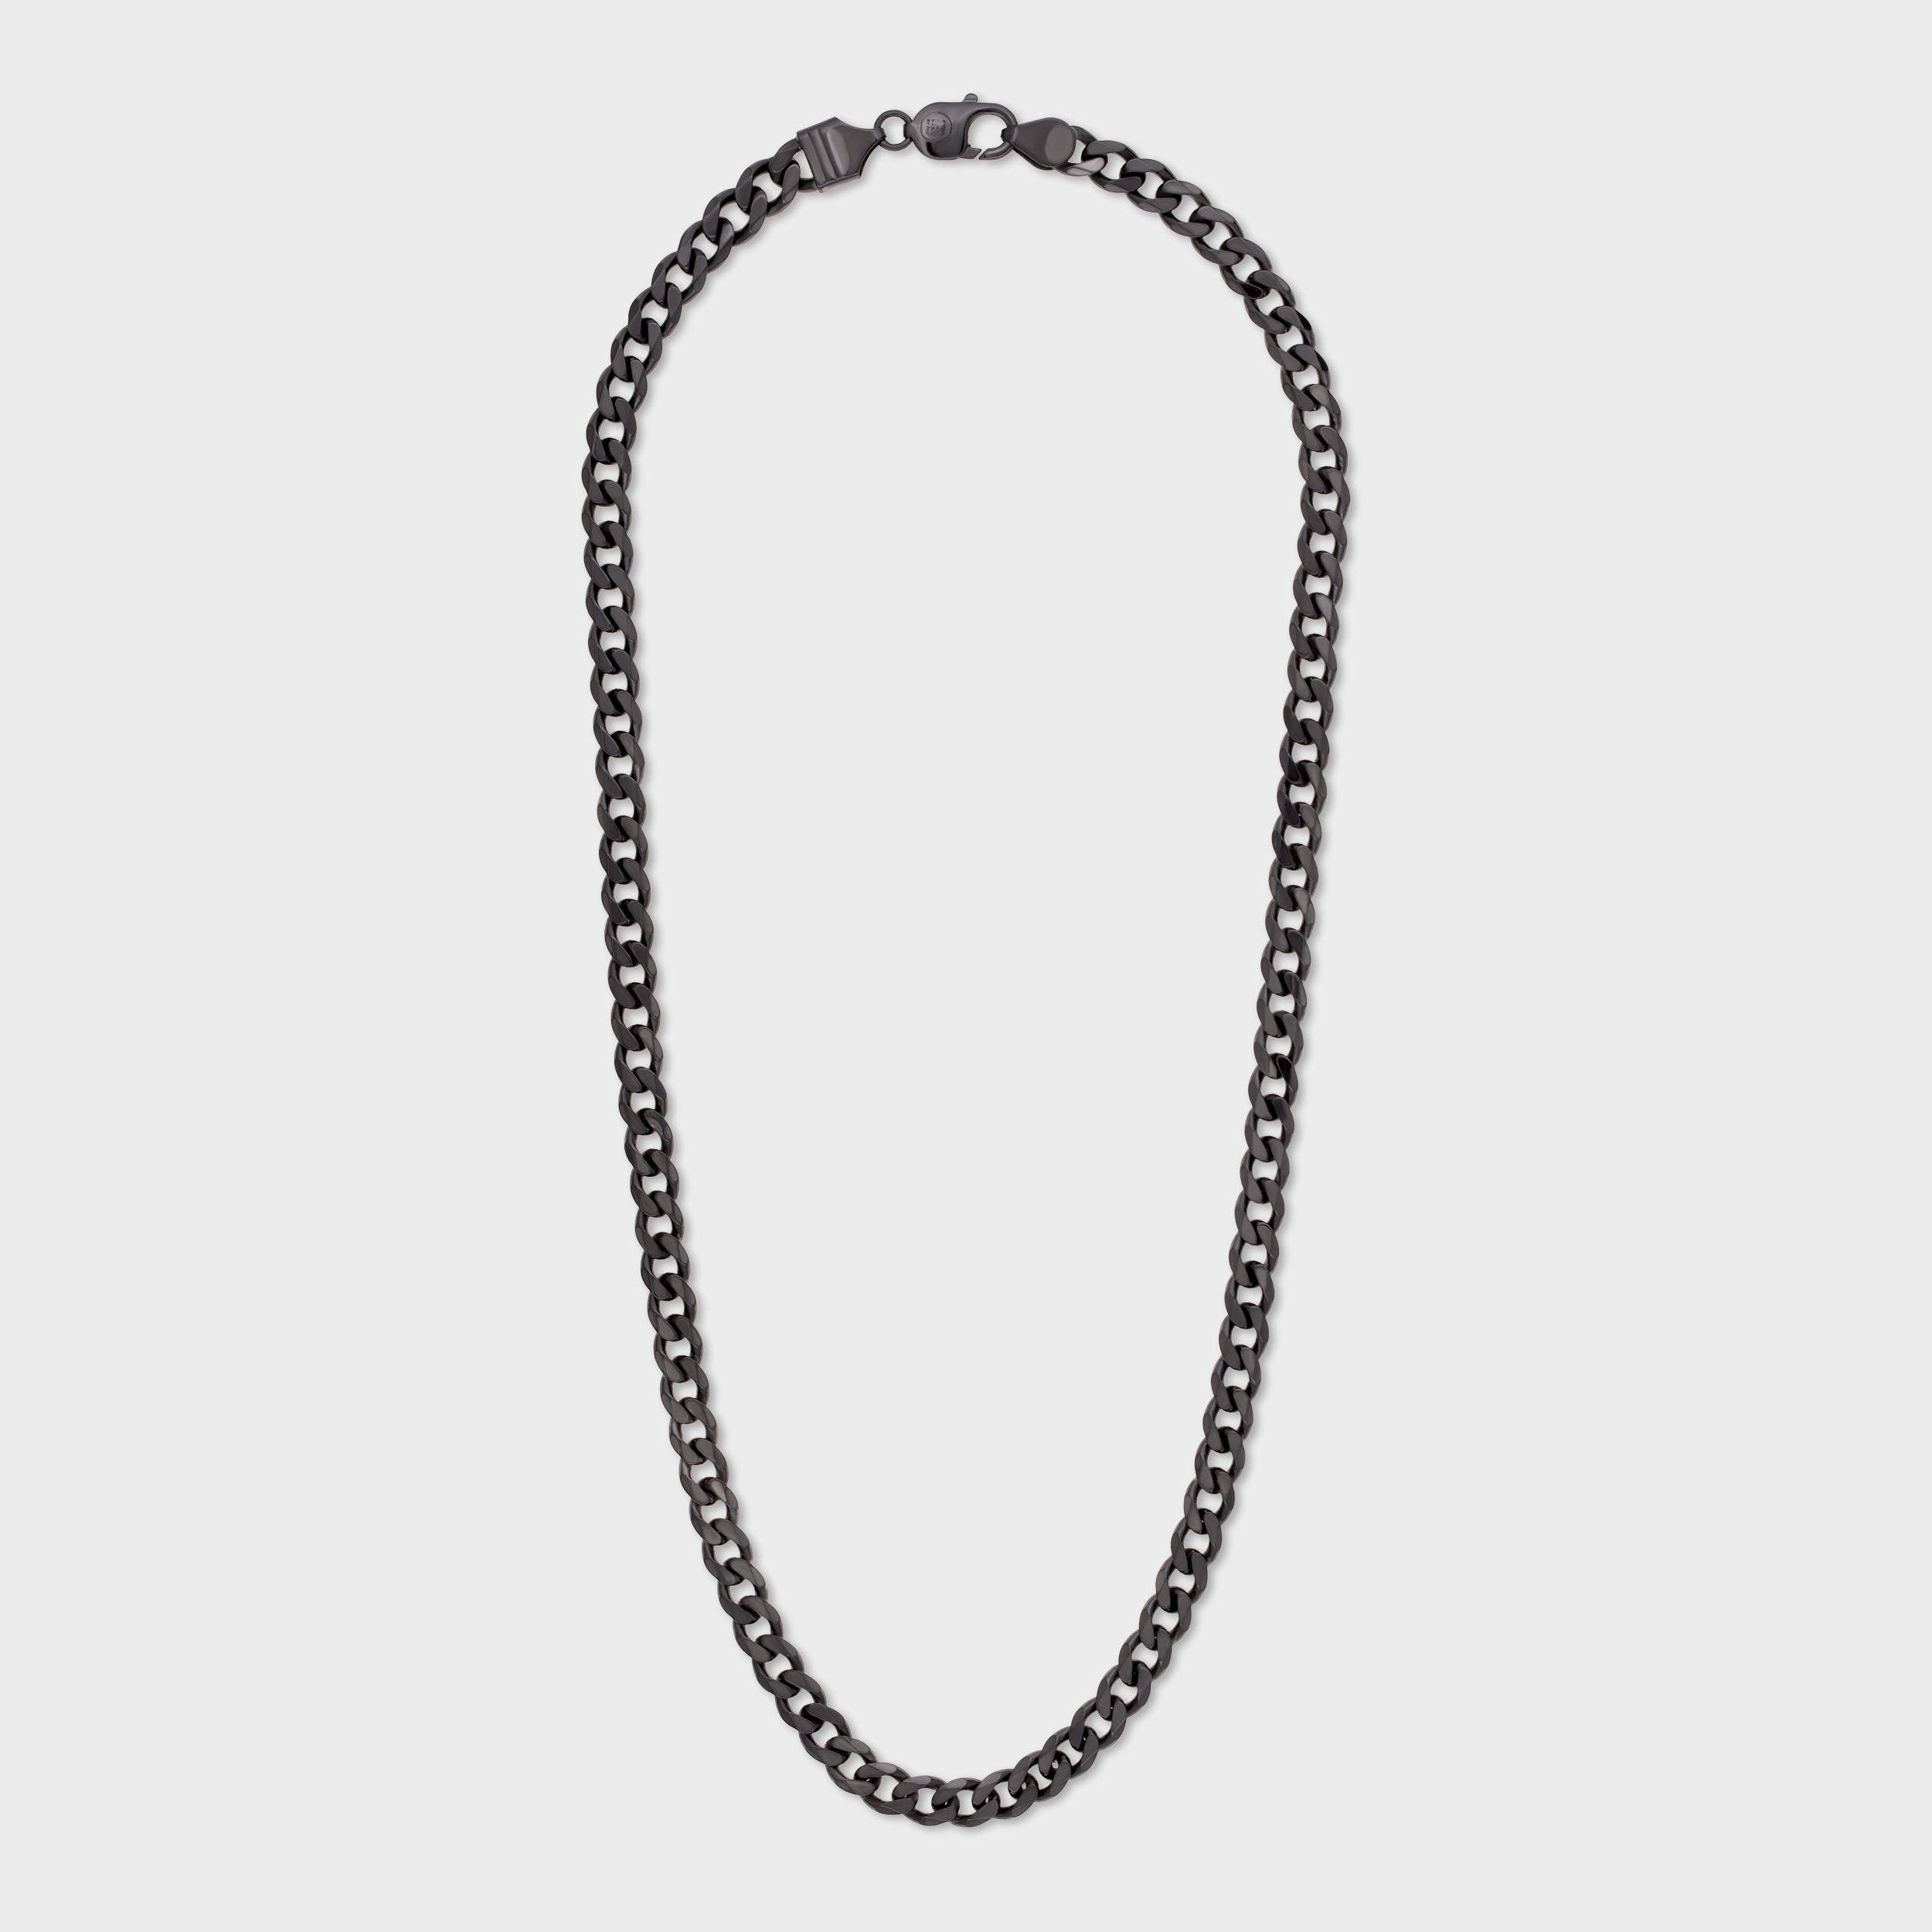 Black Sterling Silver Curb Chain Necklace | SKU : 0020420918, 0020420895 , 0020420888